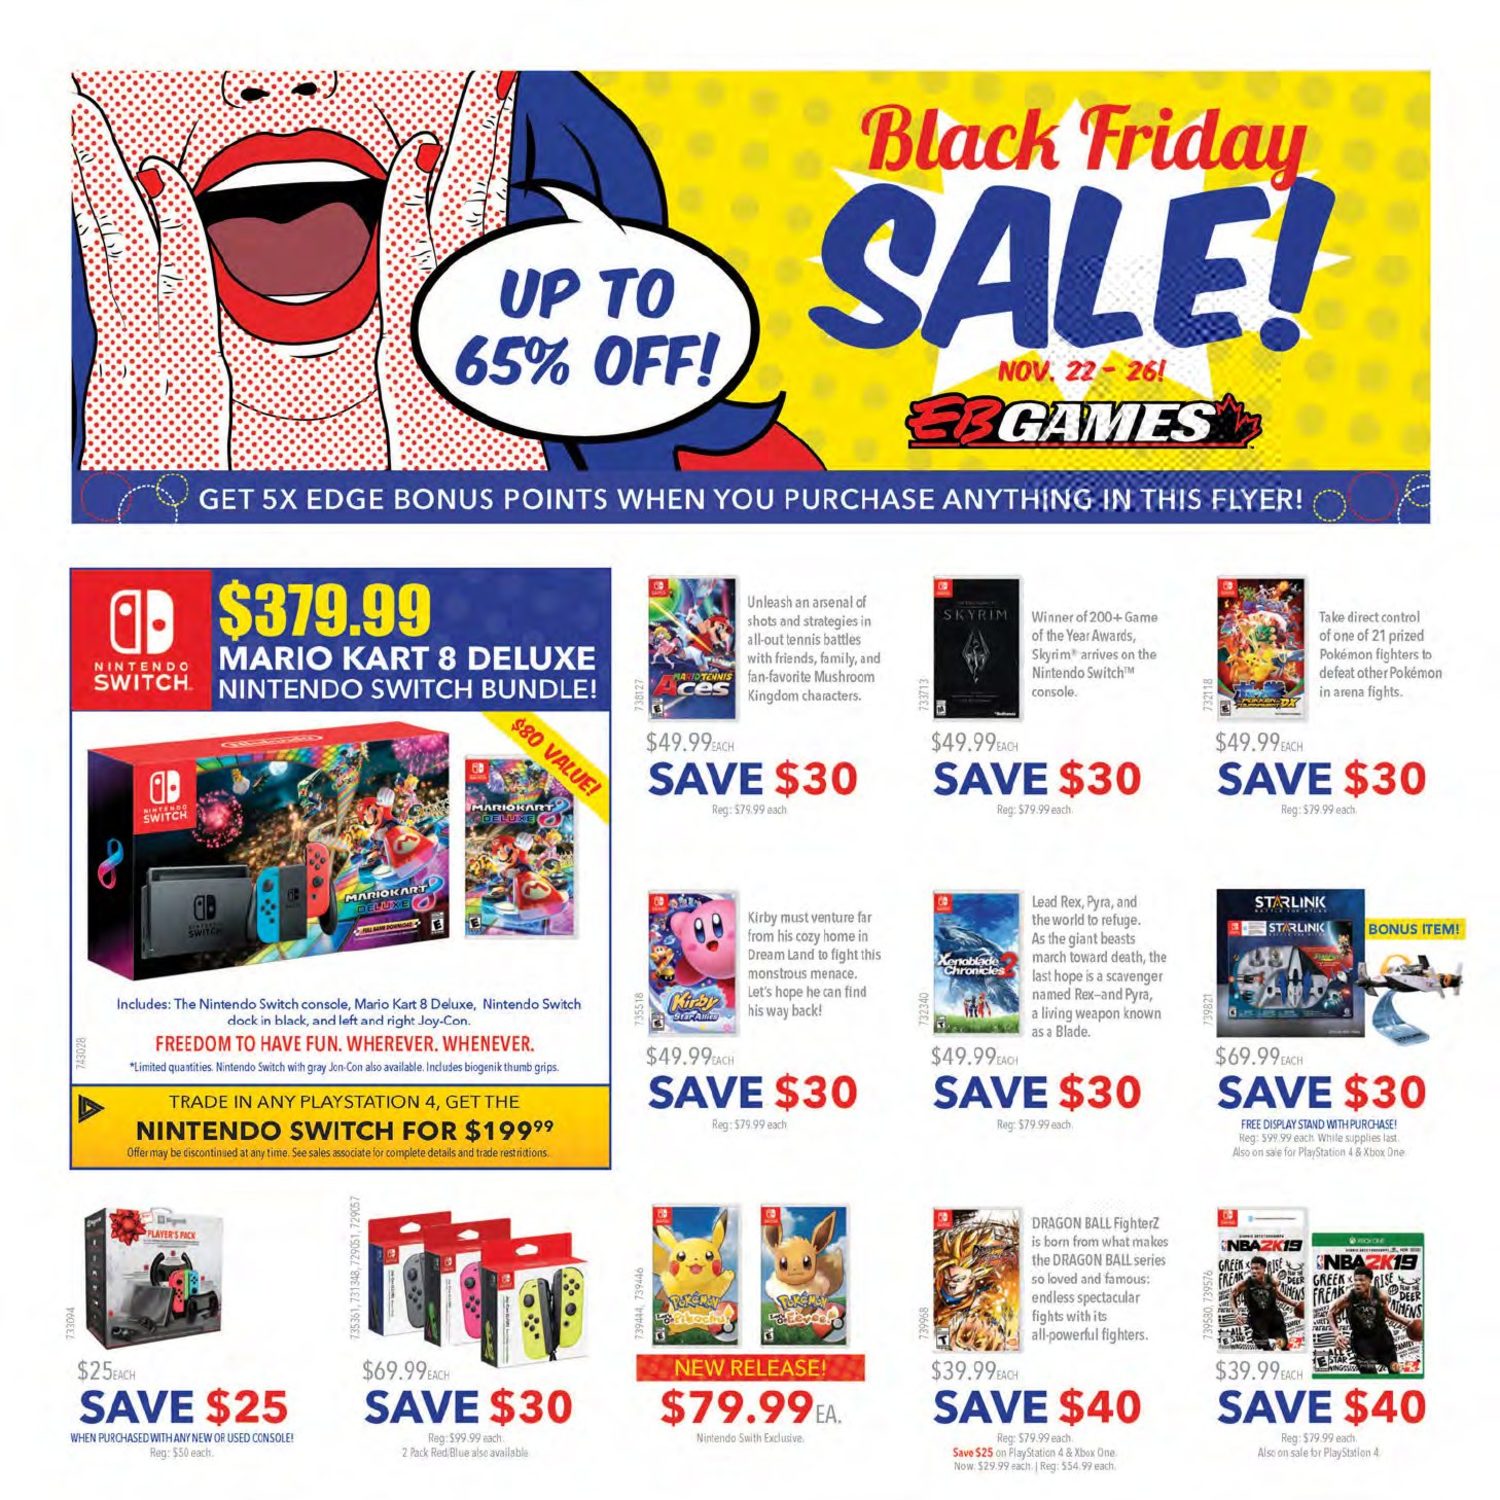 EB Games Is Having A Games Clearance Starting At $4